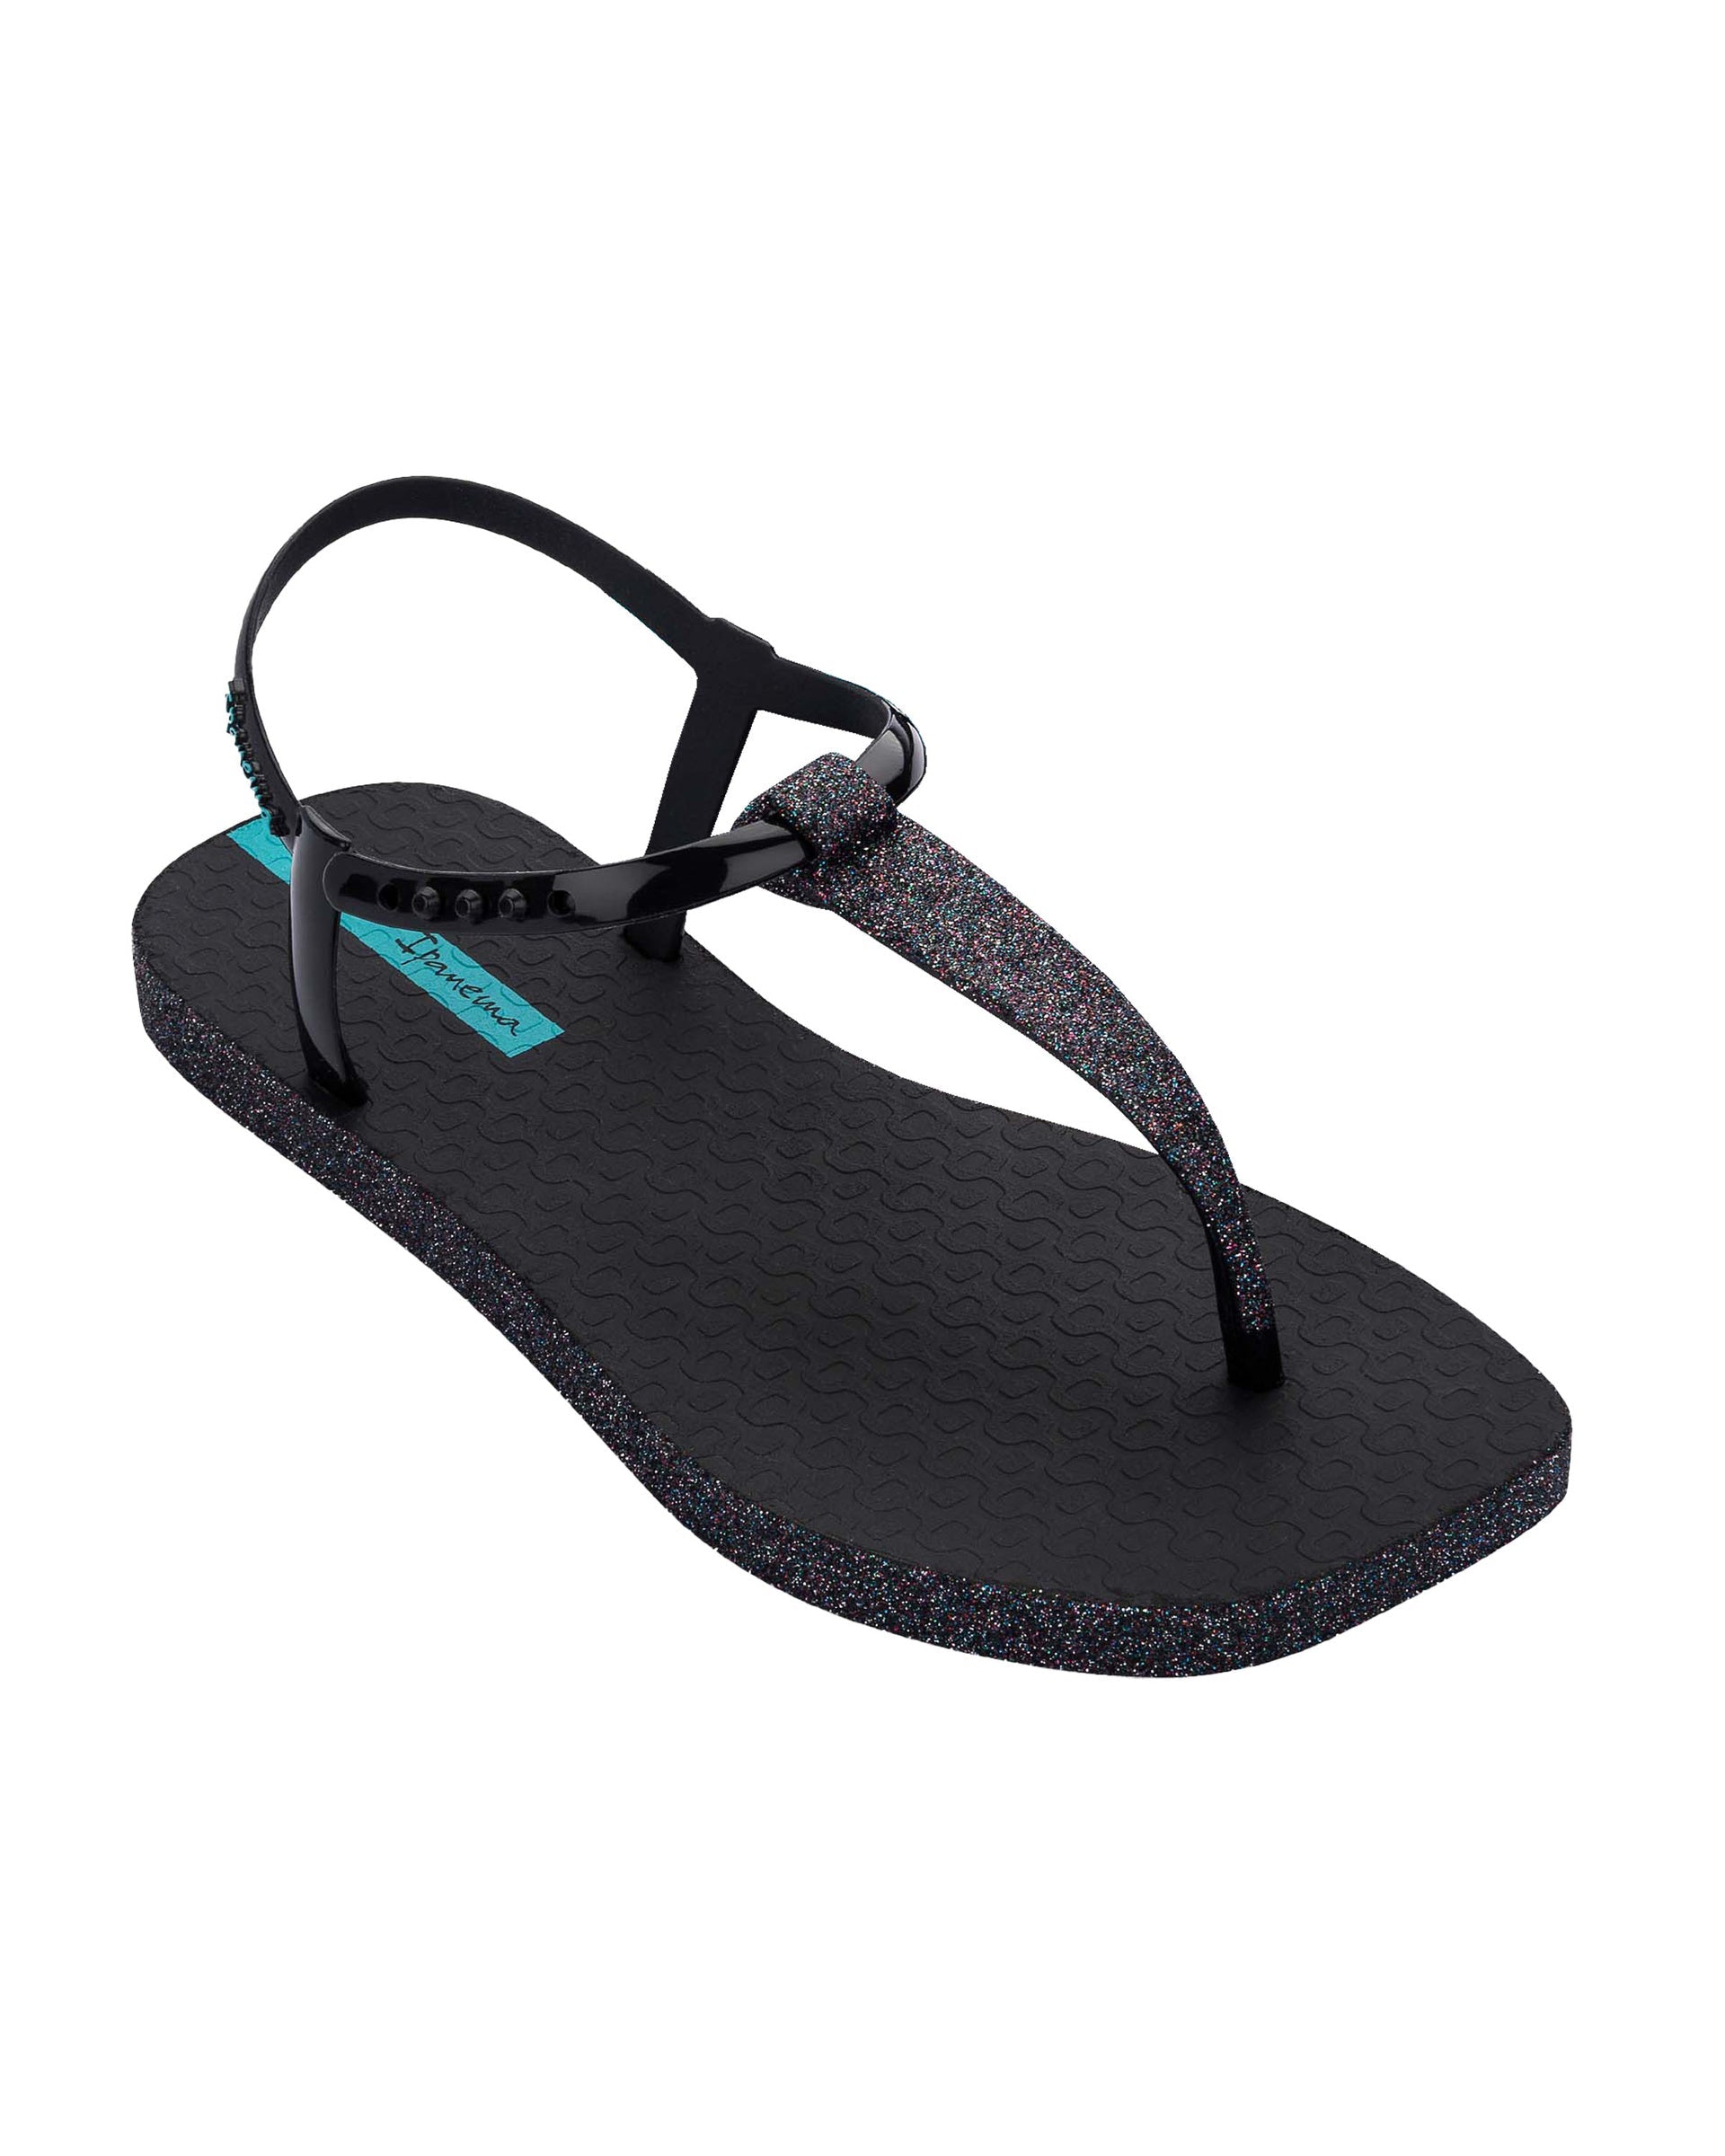 Angled view of a black Ipanema Class Edge Glow t-strap women's sandal with glitter black thong.